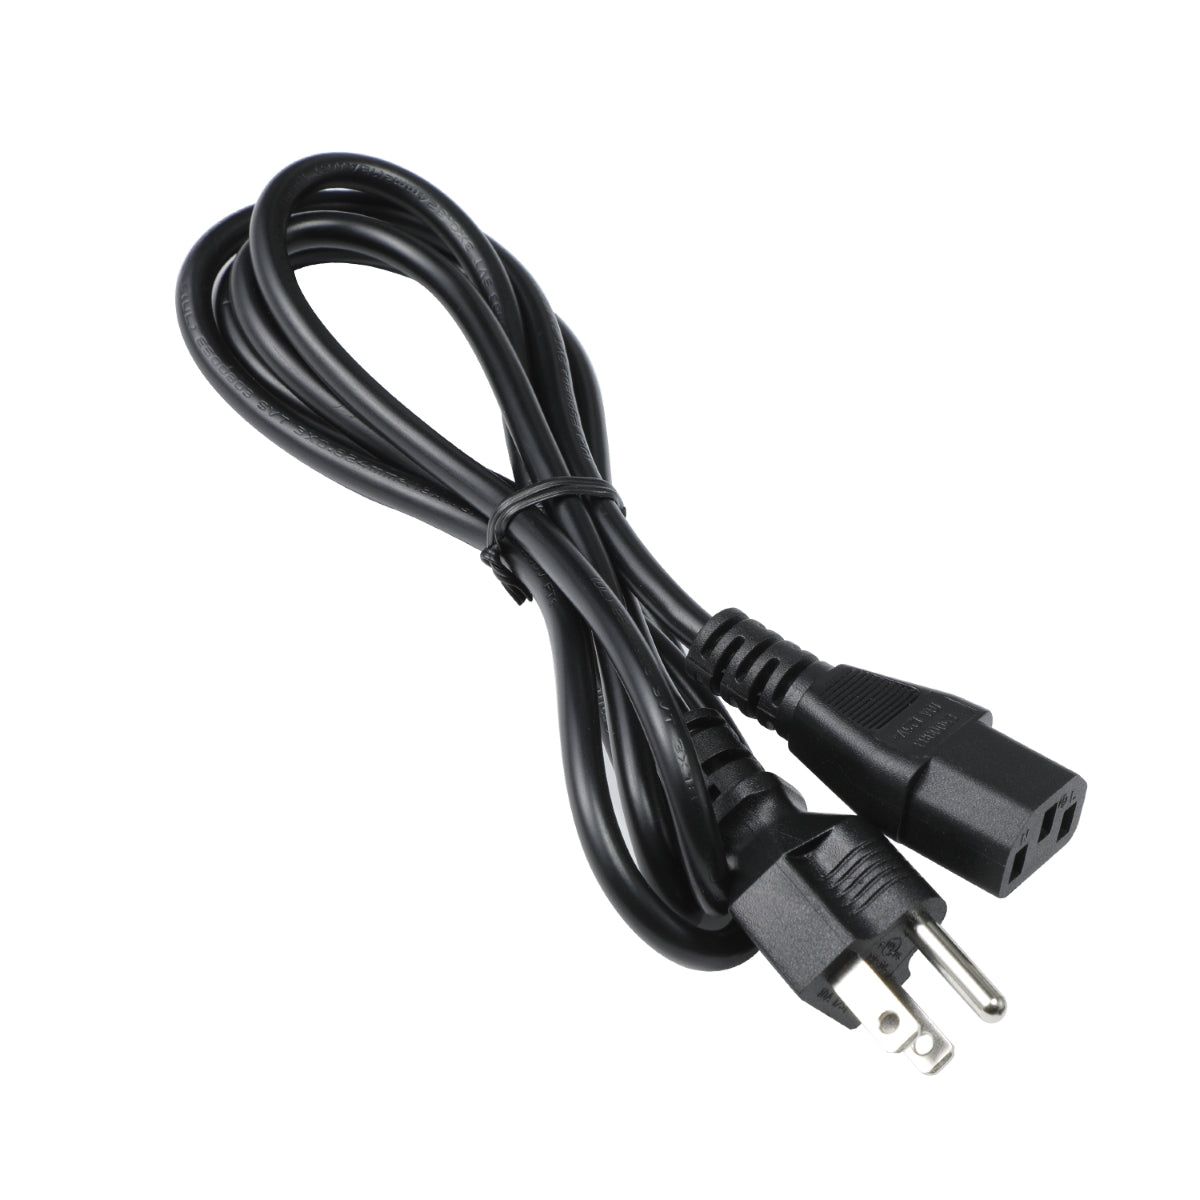 Power Cable for Philips 325E8/27 LCD Monitor.